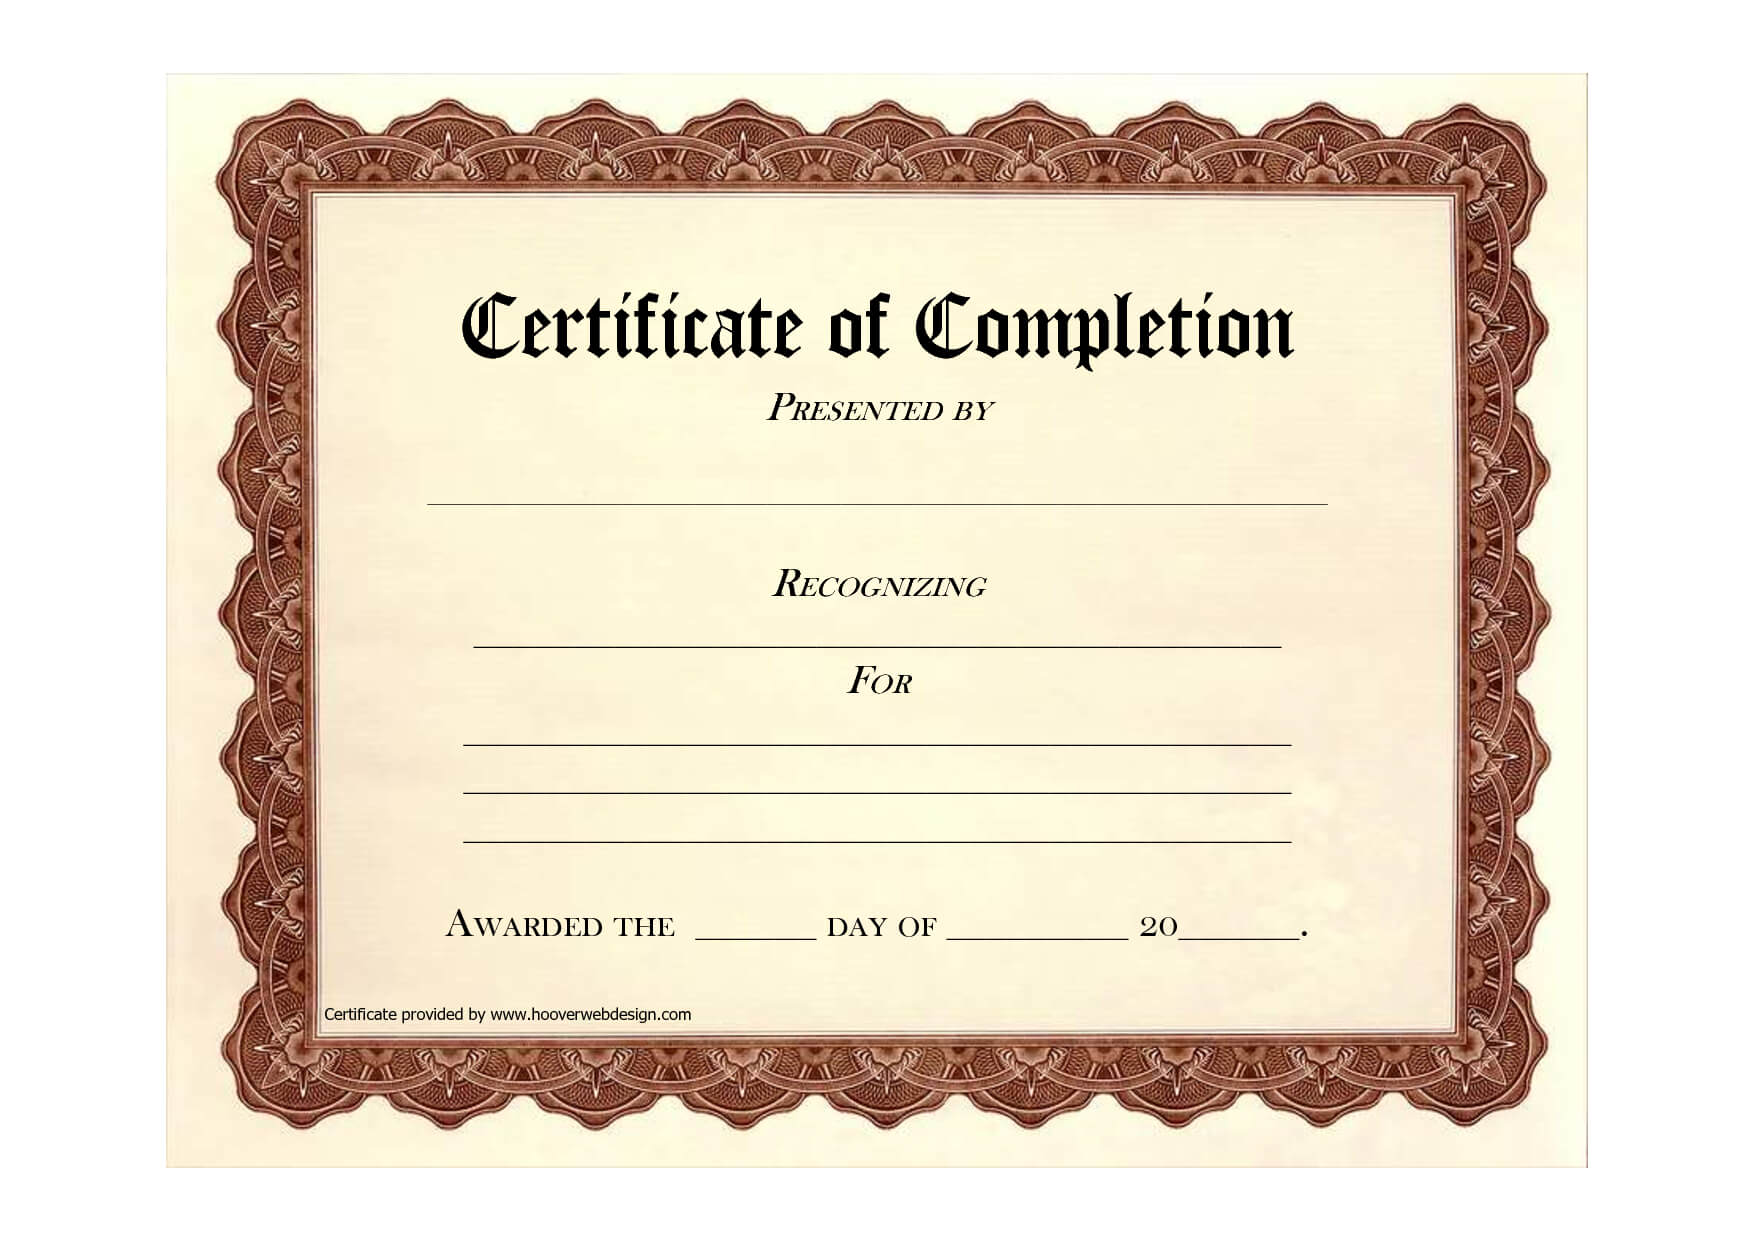 10 Certificate Of Completion Templates Free Download Images In Free Certificate Of Completion Template Word